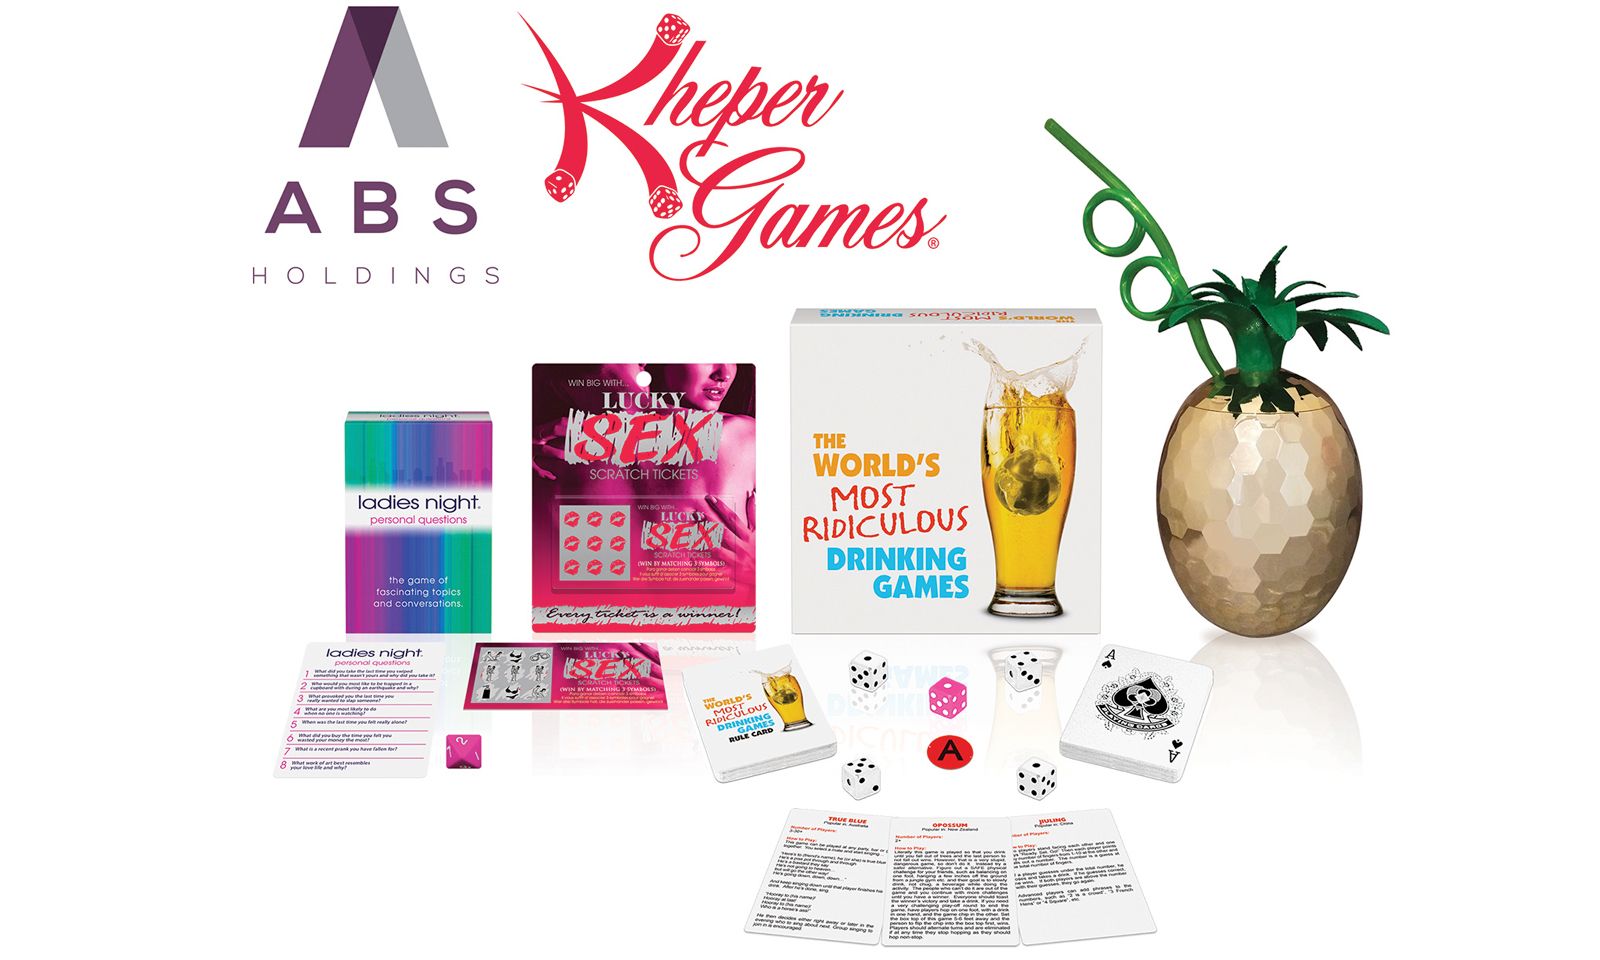 Kheper Games Taps ABS Holdings For Distro Overseas